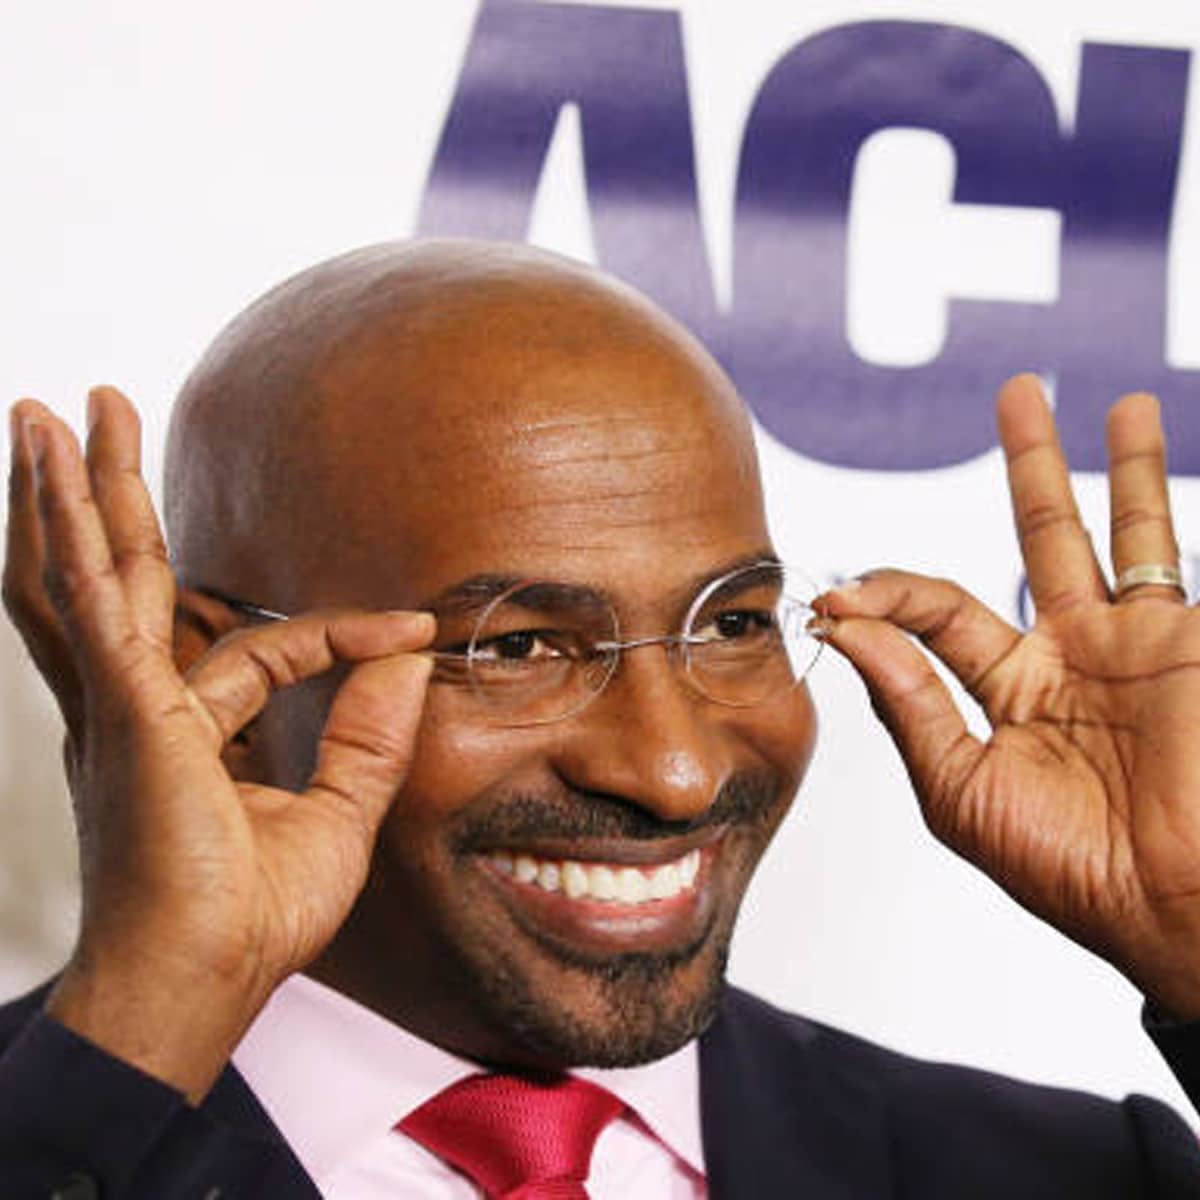 Van Jones arrives to the ACLU SoCal's Annual Bill of Rights dinner held at the Beverly Wilshire Four Seasons Hotel